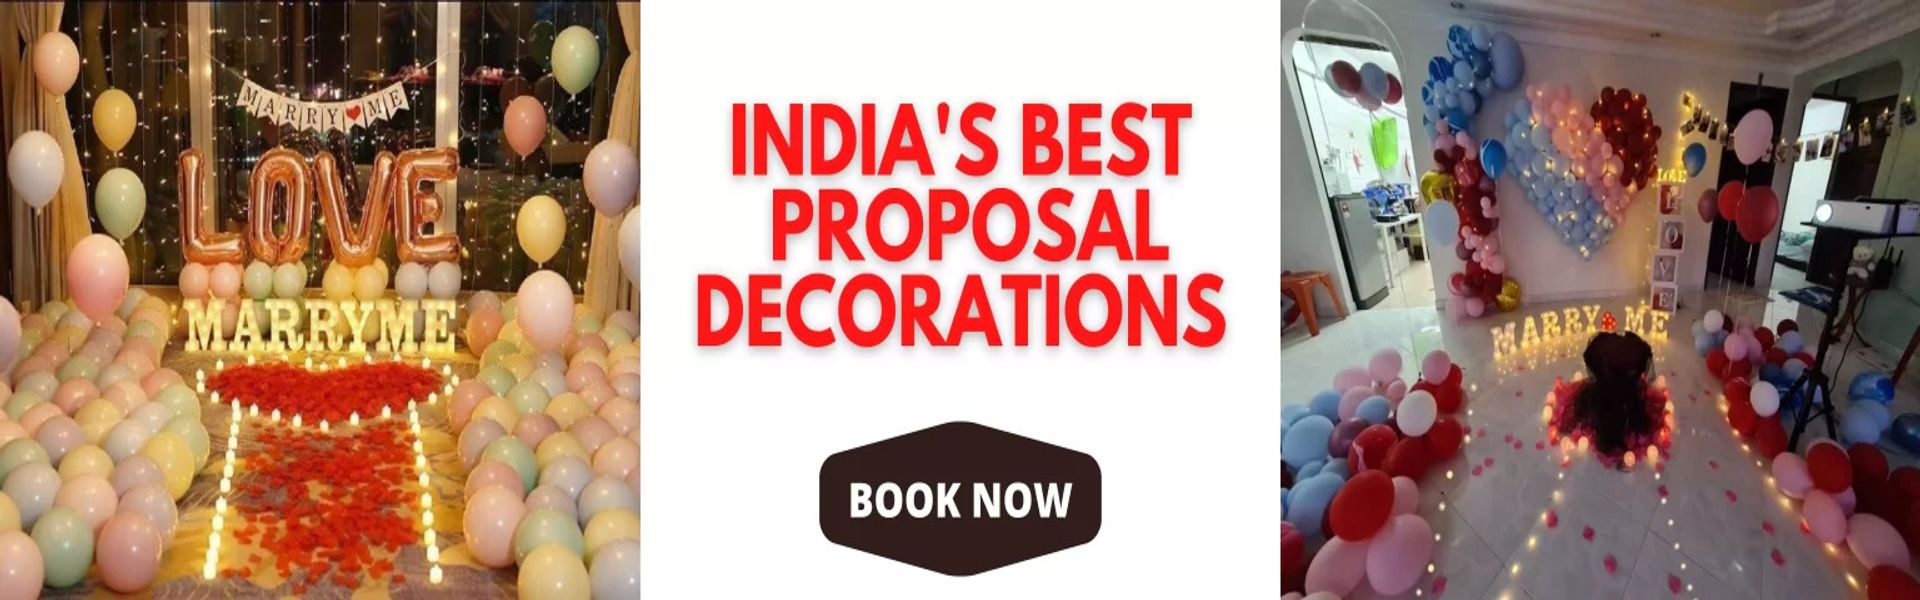 Proposal Decorations Ideas for Wedding or Engagement in Delhi NCR